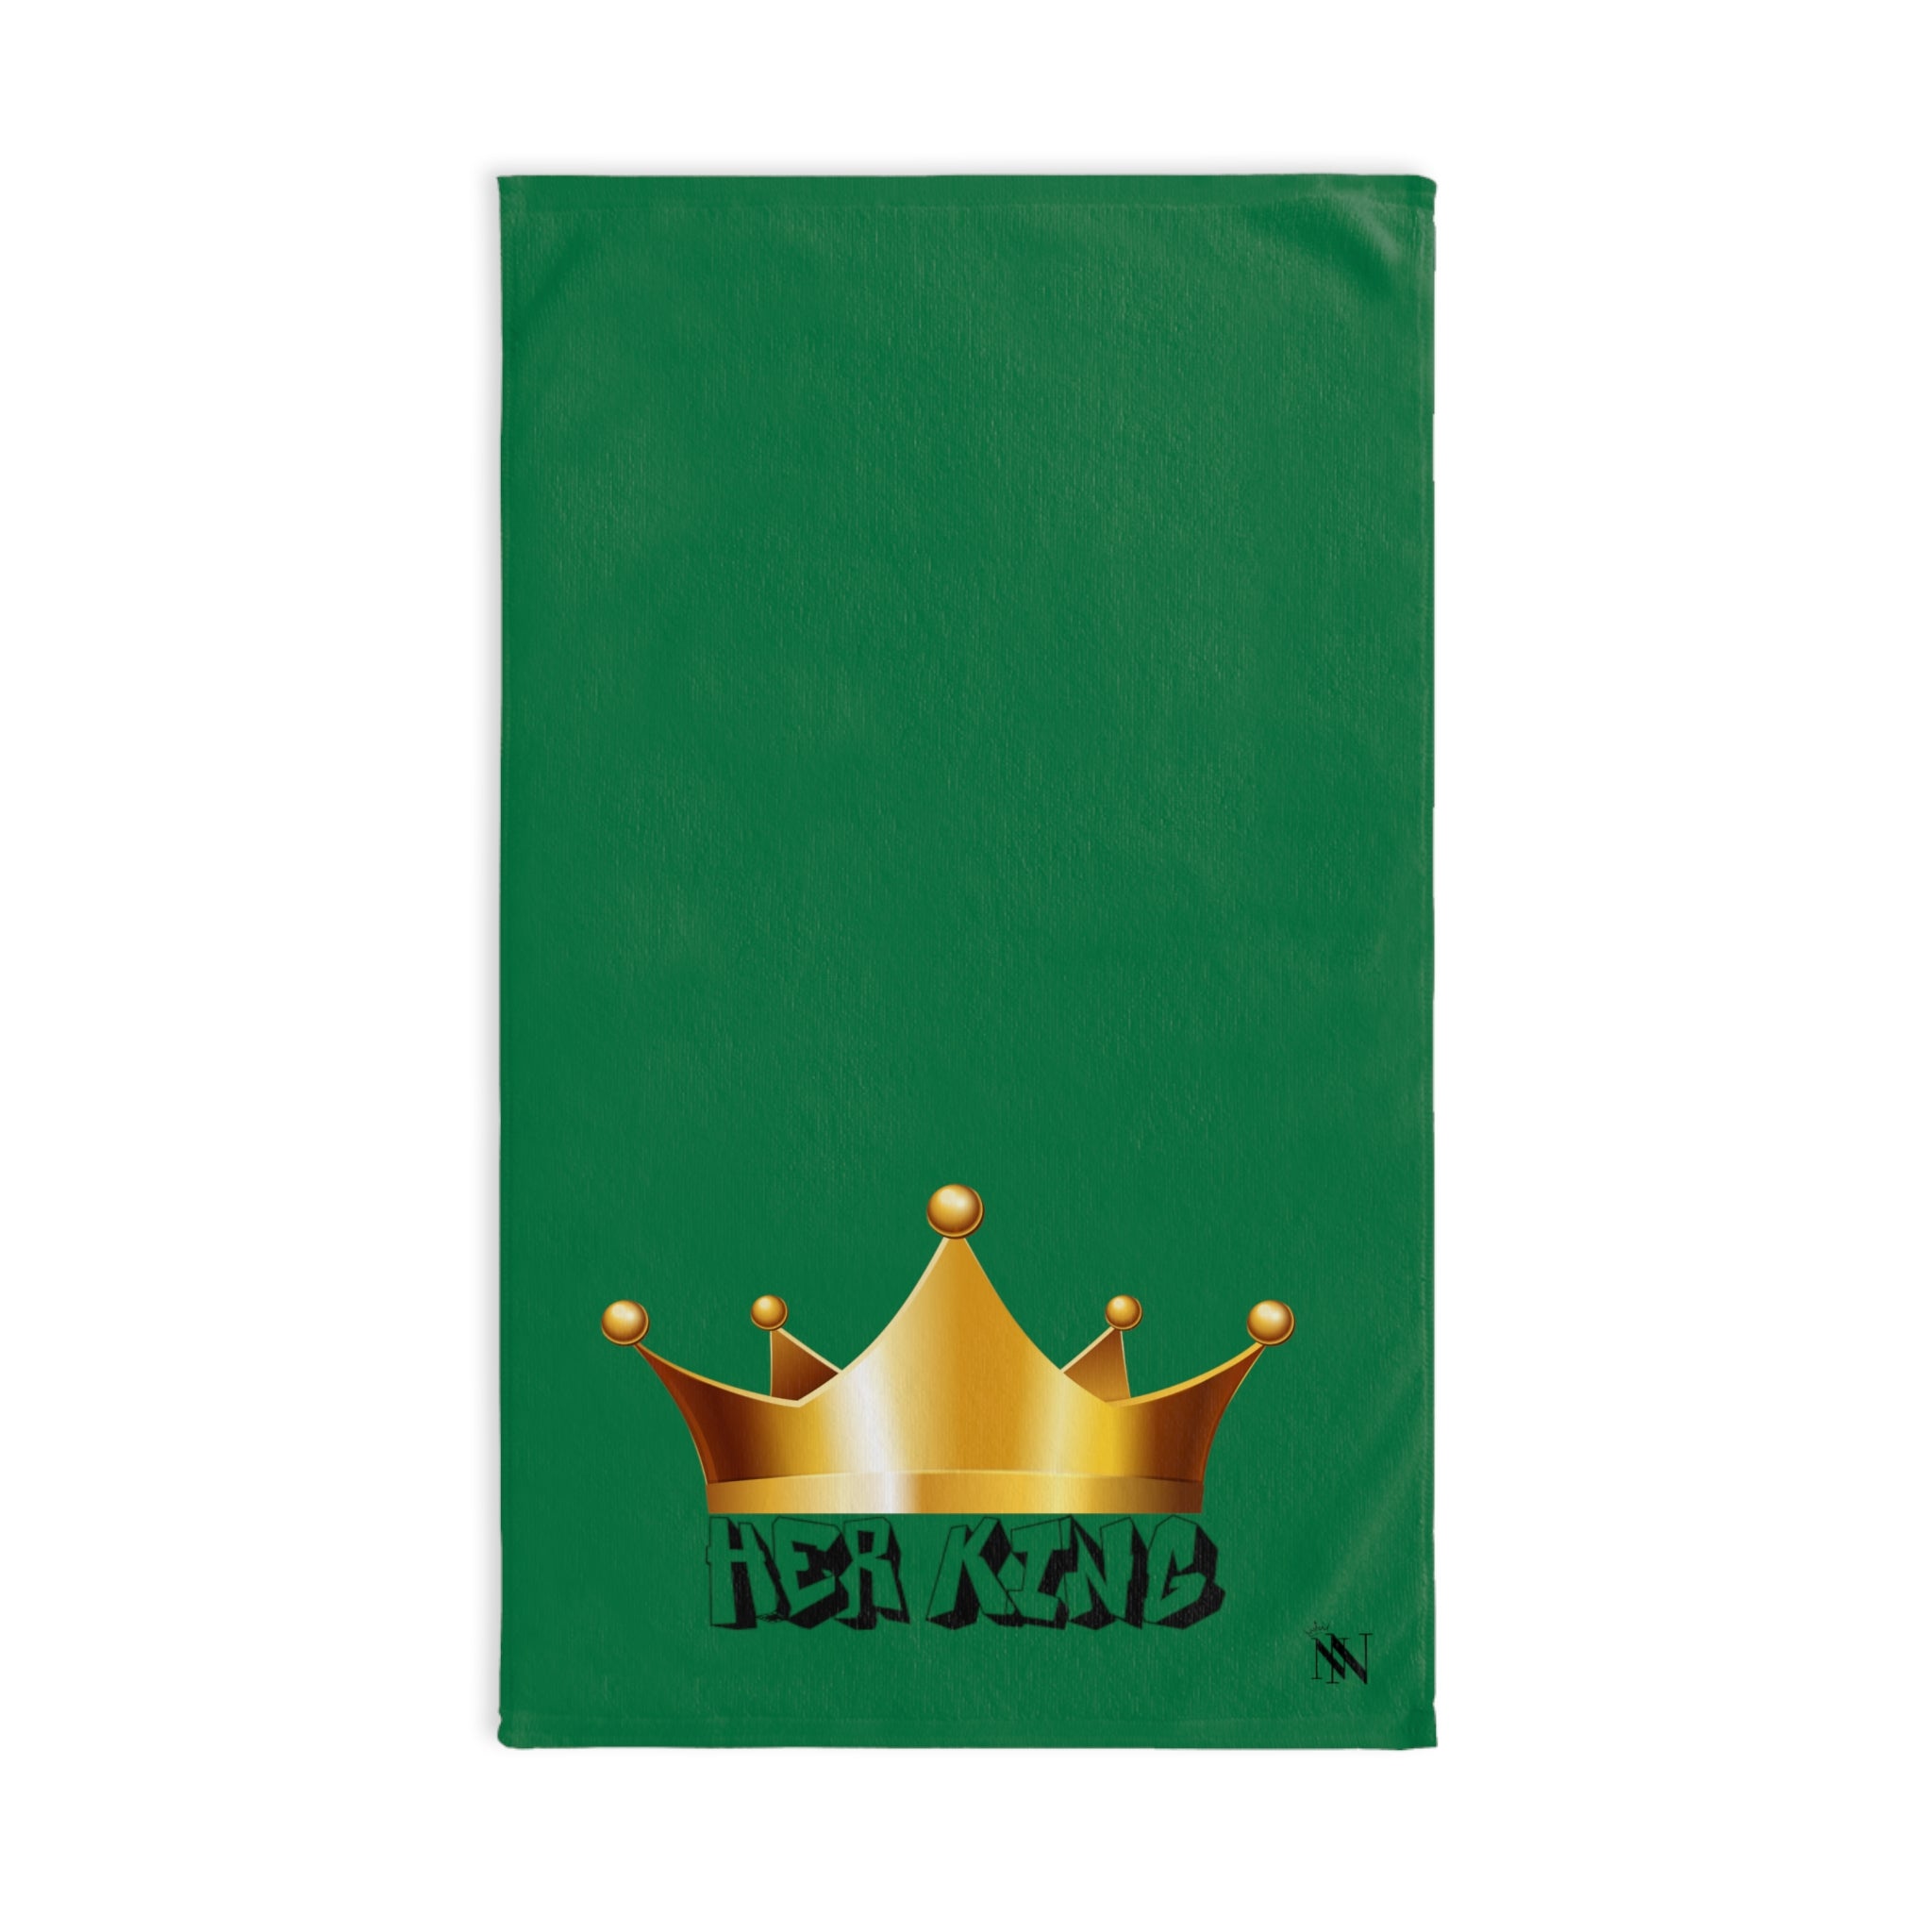 Gold Her King Green | Anniversary Wedding, Christmas, Valentines Day, Birthday Gifts for Him, Her, Romantic Gifts for Wife, Girlfriend, Couples Gifts for Boyfriend, Husband NECTAR NAPKINS